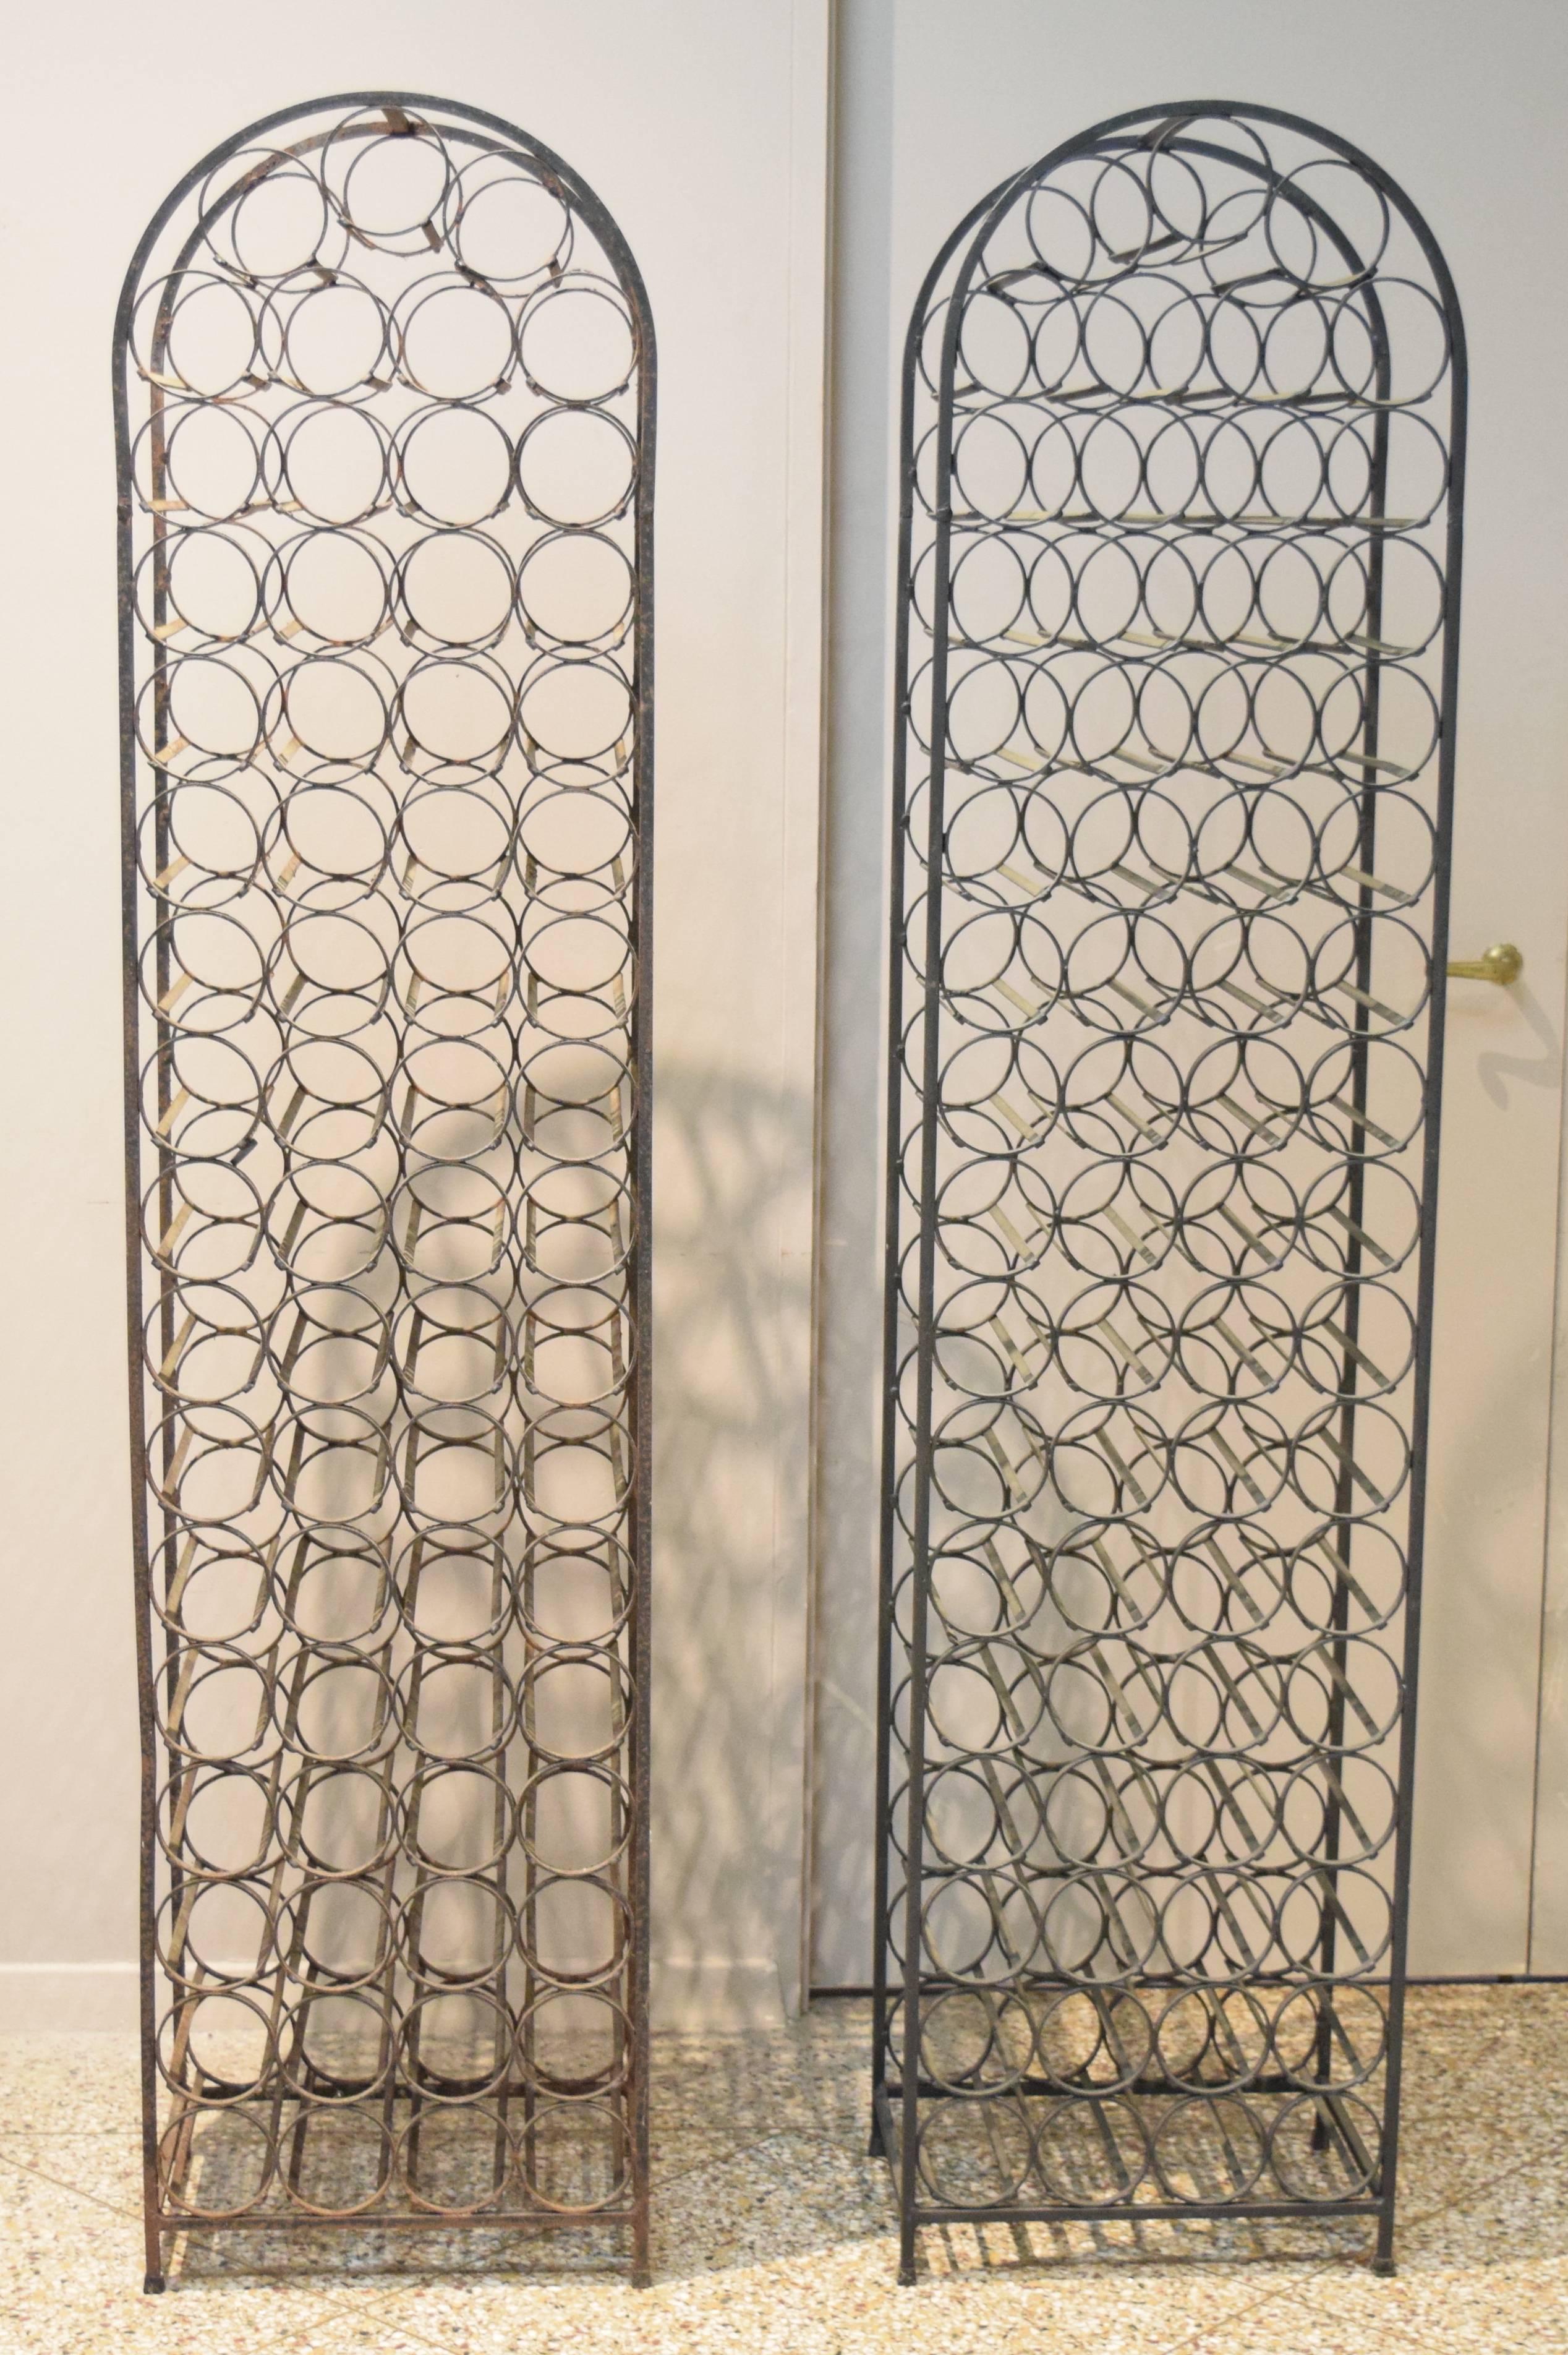 Two large wrought iron wine racks designed by Arthur Umanoff for Shaver Howard and distributed by Raymor. One has a fair amount of rust and will need to be sandblasted and powder coated, while the second is in better original condition. Many other